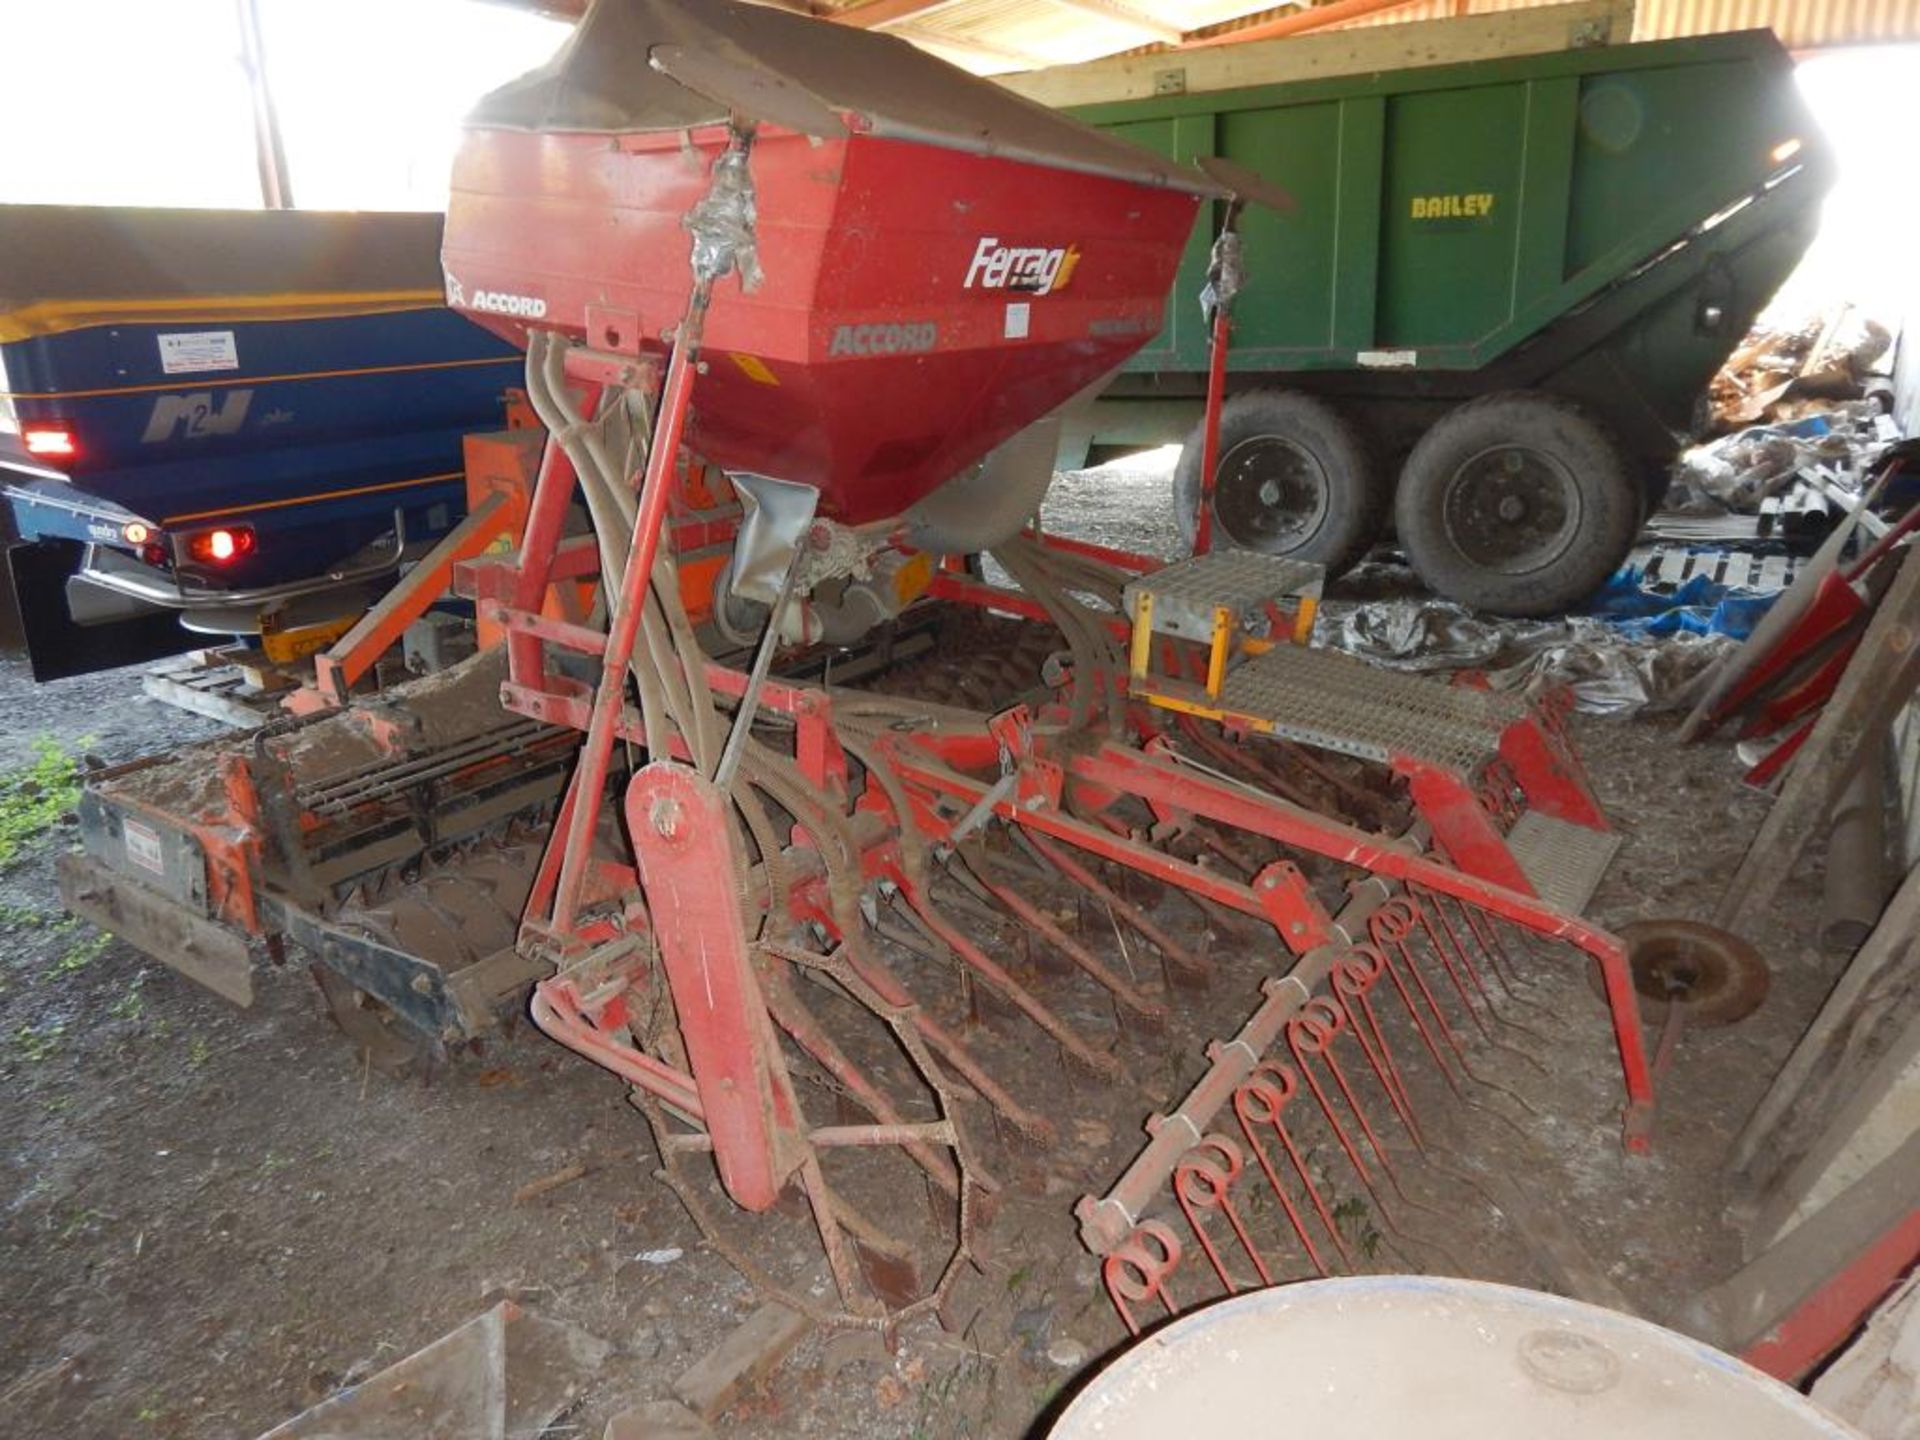 Muratori power harrow with packer roller with mounted Accord Pneumatic DA drill with bout markers, - Image 3 of 3